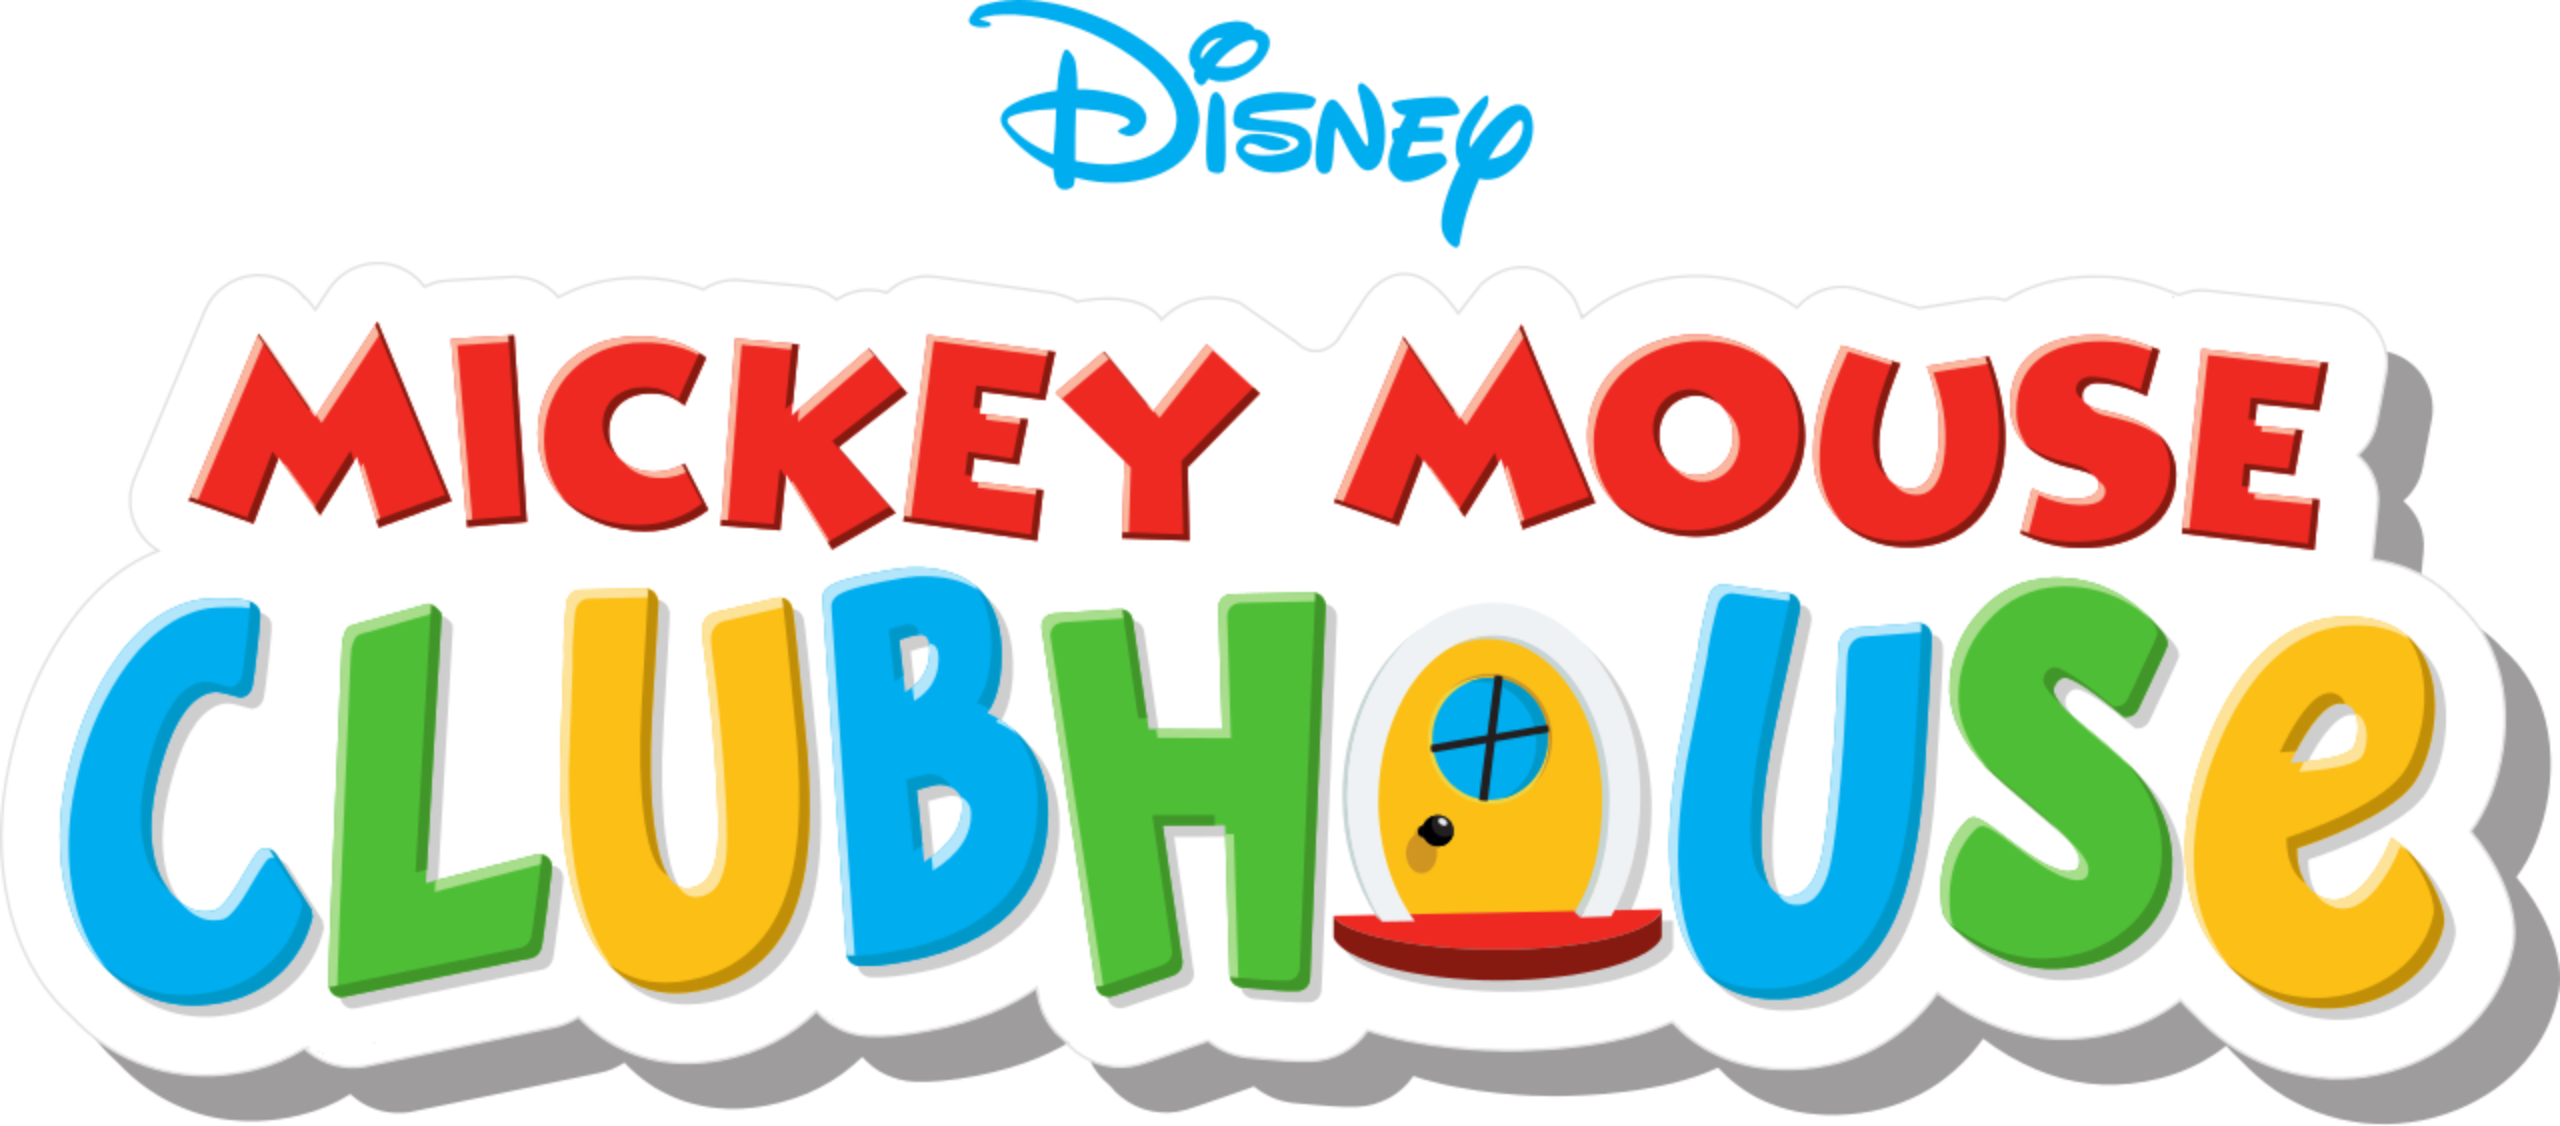 Mickey Mouse Clubhouse Volume 1 and 2 (12 DVDs Box Set)